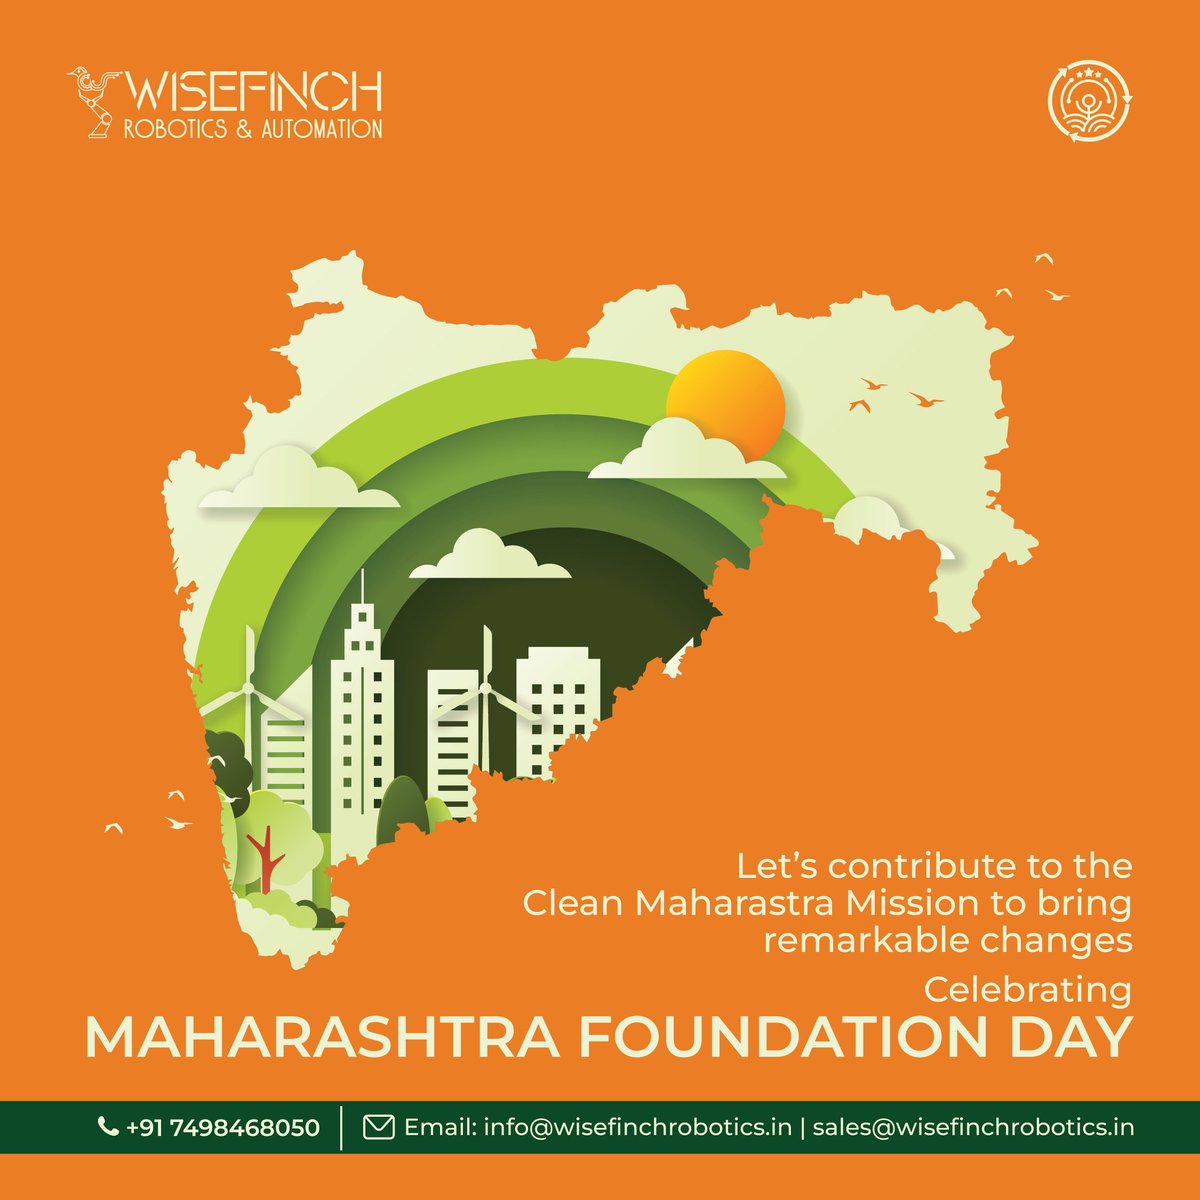 Our little contribution to the Clean Maharashtra mission can bring remarkable changes. Participate in the Clean Maharashtra Mission and make Maharashtra clean again to bring new reign.
Celebrating Maharashtra Day
#swachhasurvekshan #maharashtra #maharashtradin #CleanMaharashtra